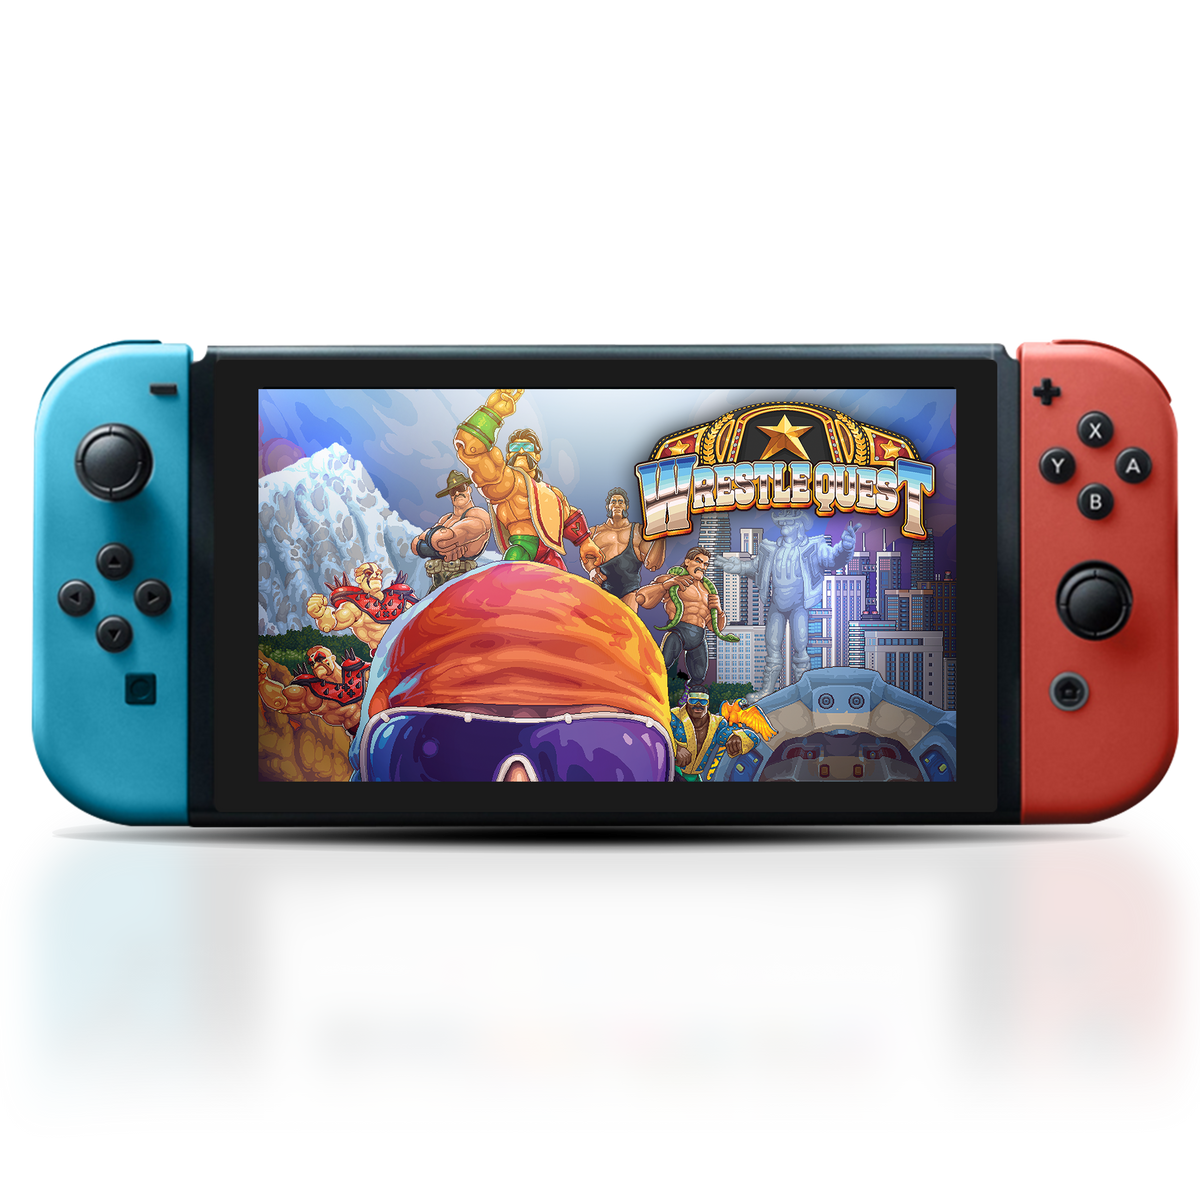 WrestleQuest for Nintendo Switch - Nintendo Official Site